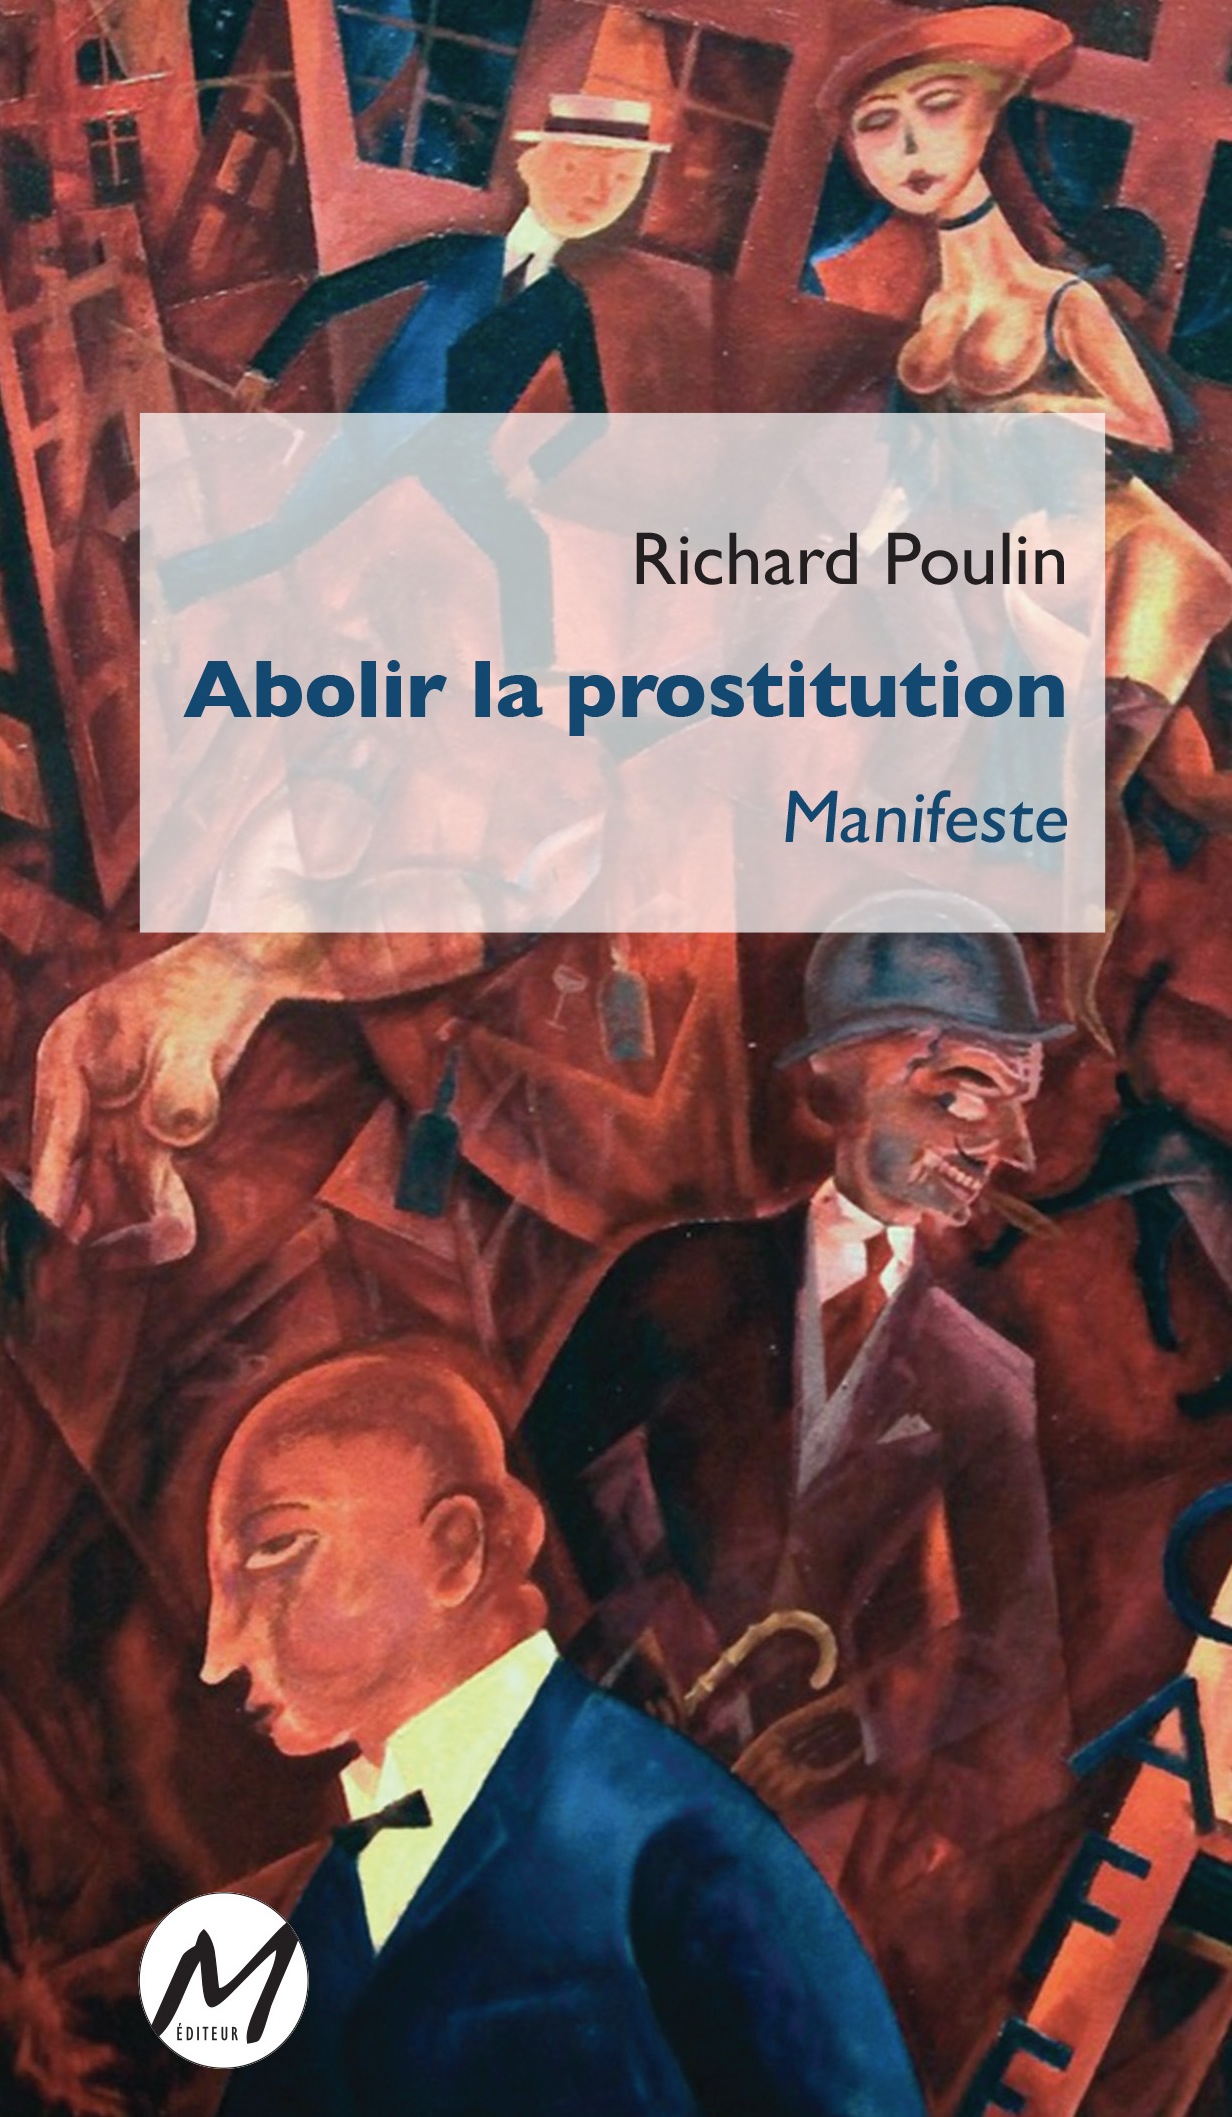 Couverture_1re-Abolir-prostitution-1